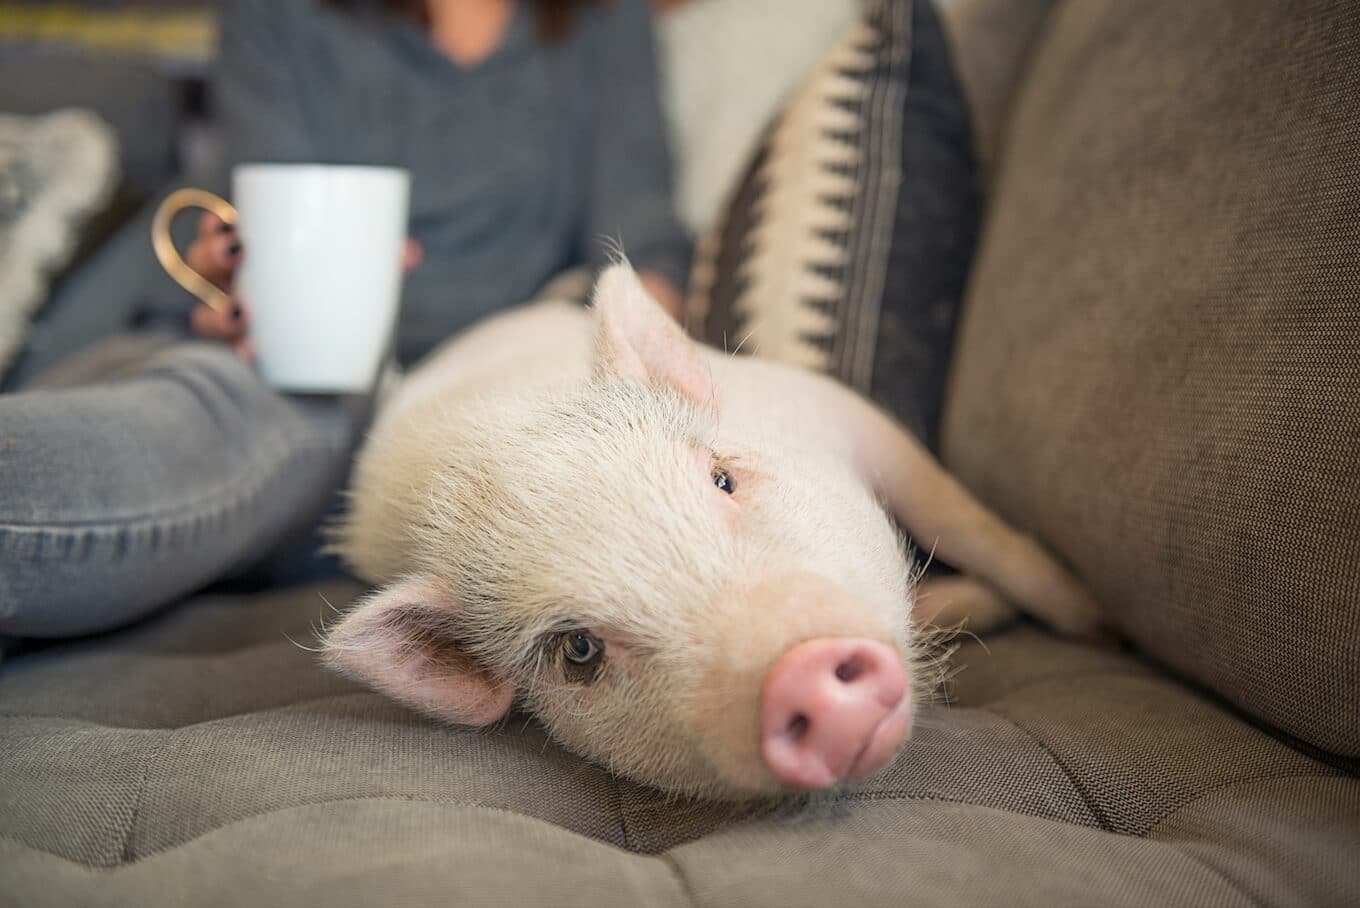 Meet Pilo, a Pig Being Raised “as a Dog” for a Scientific Study